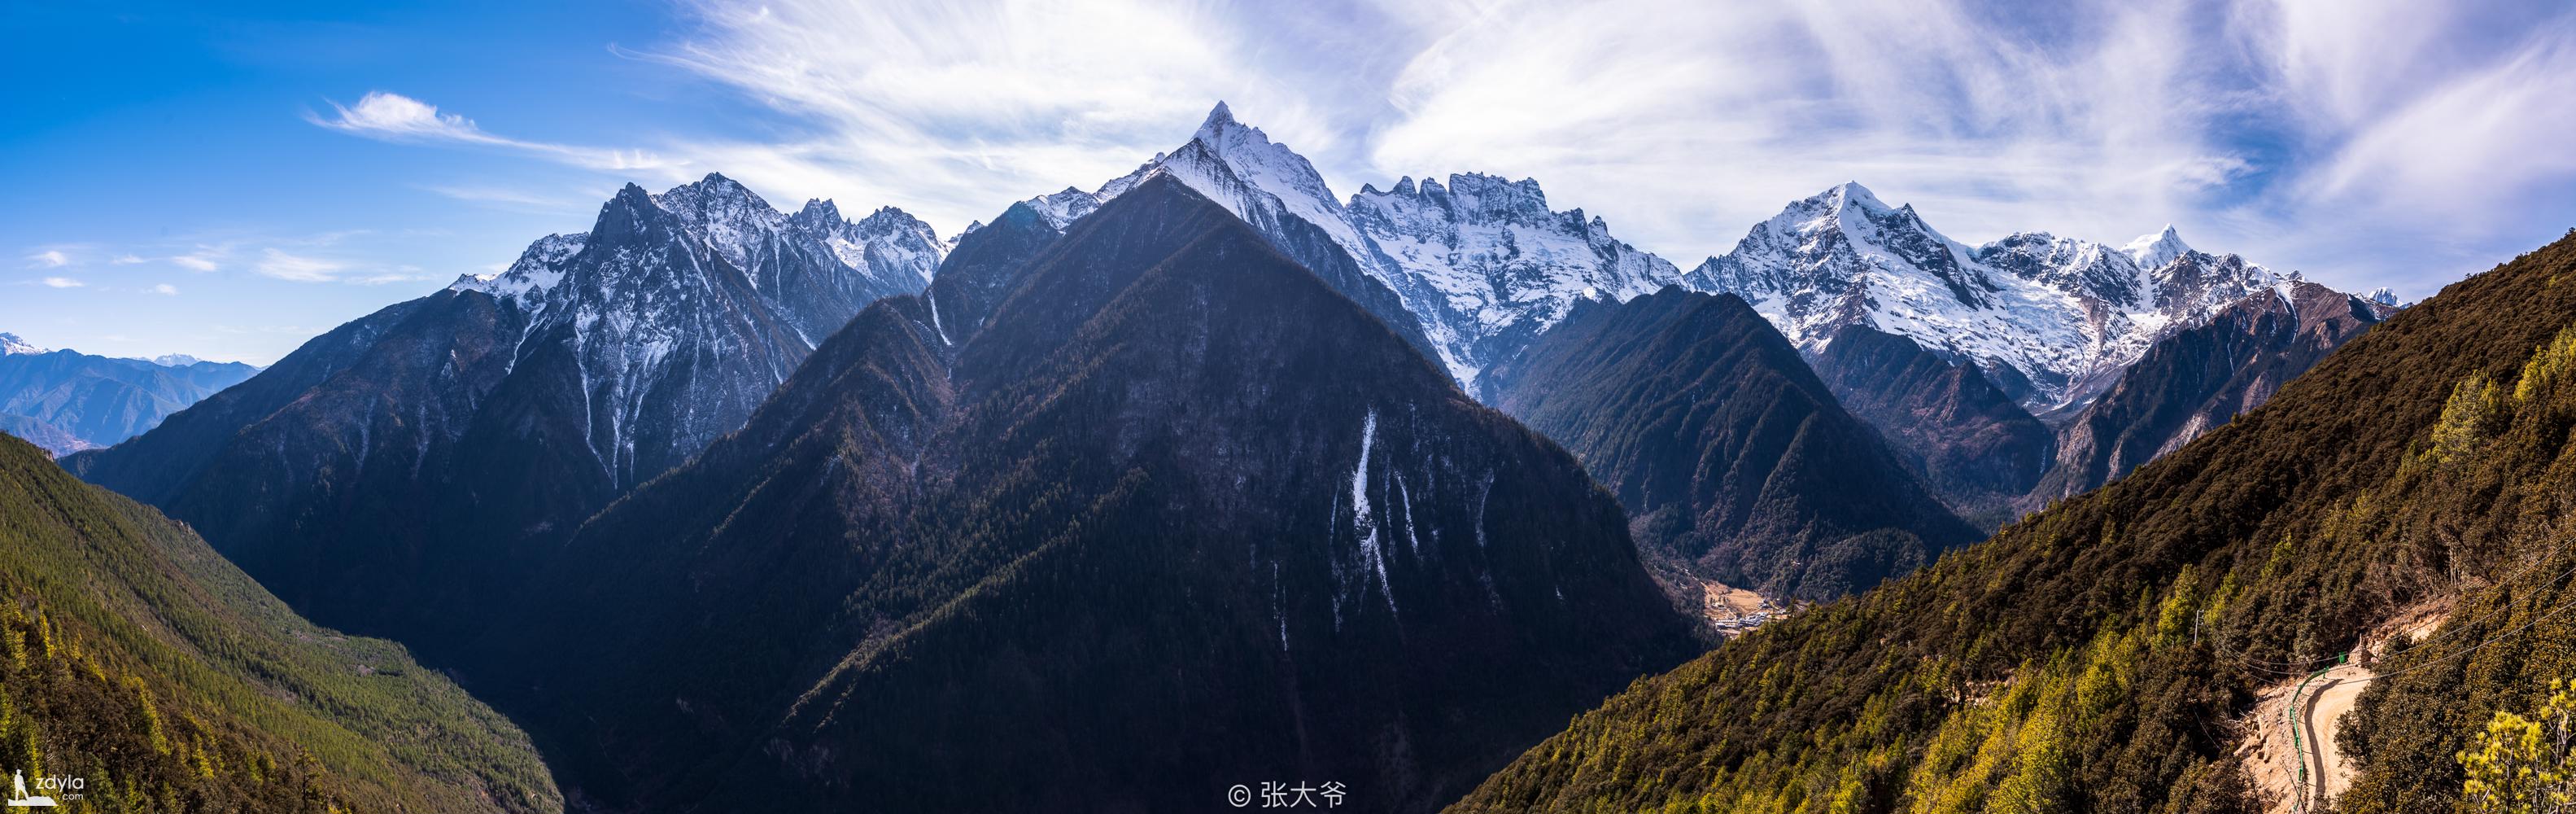 Look Meili Snow Mountain from Yubeng Village